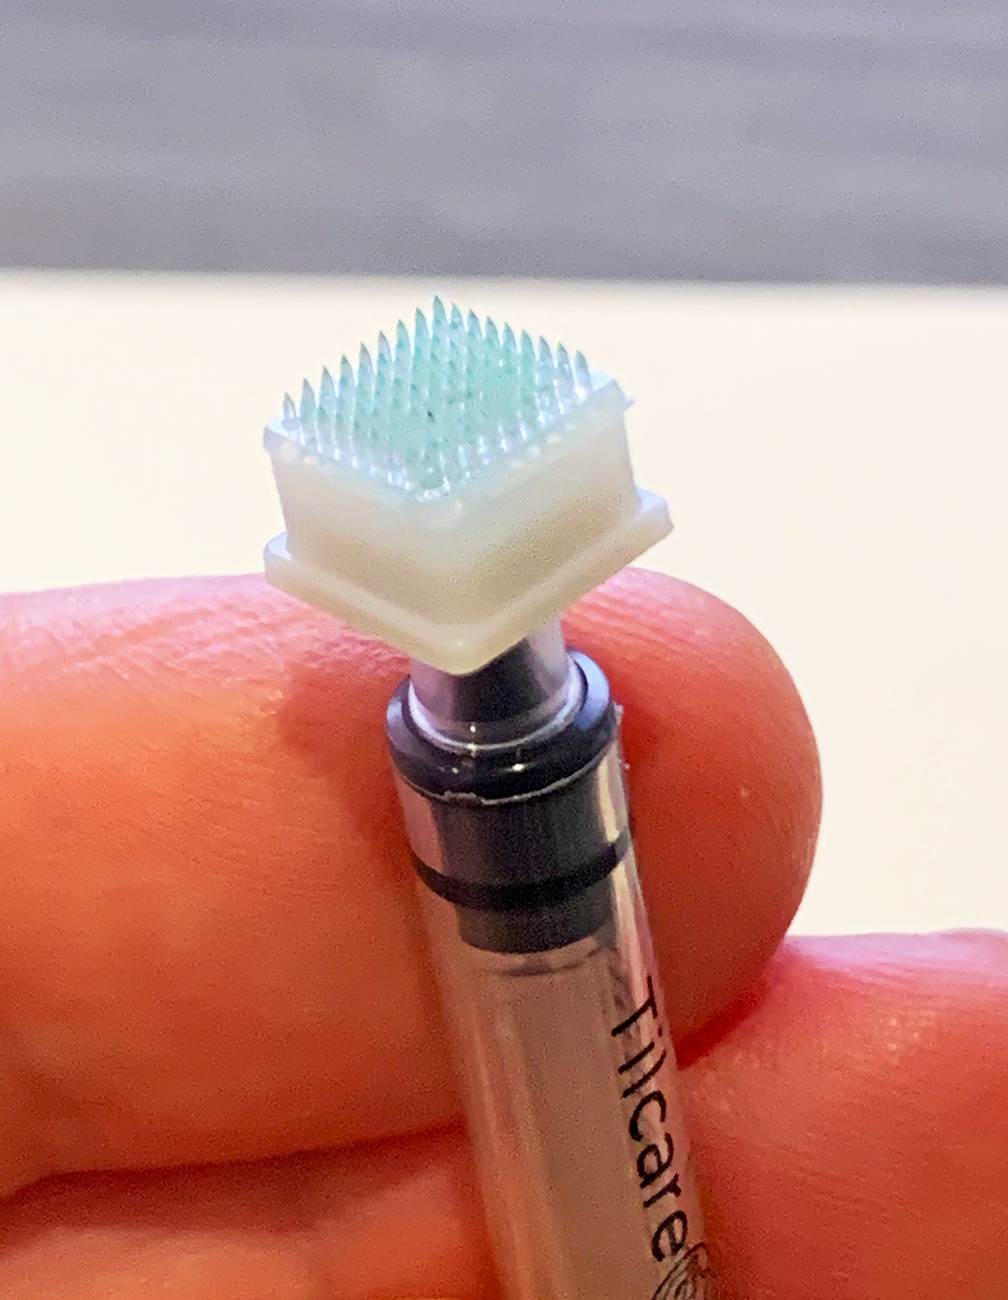 Syringe that delivers drugs into the skin